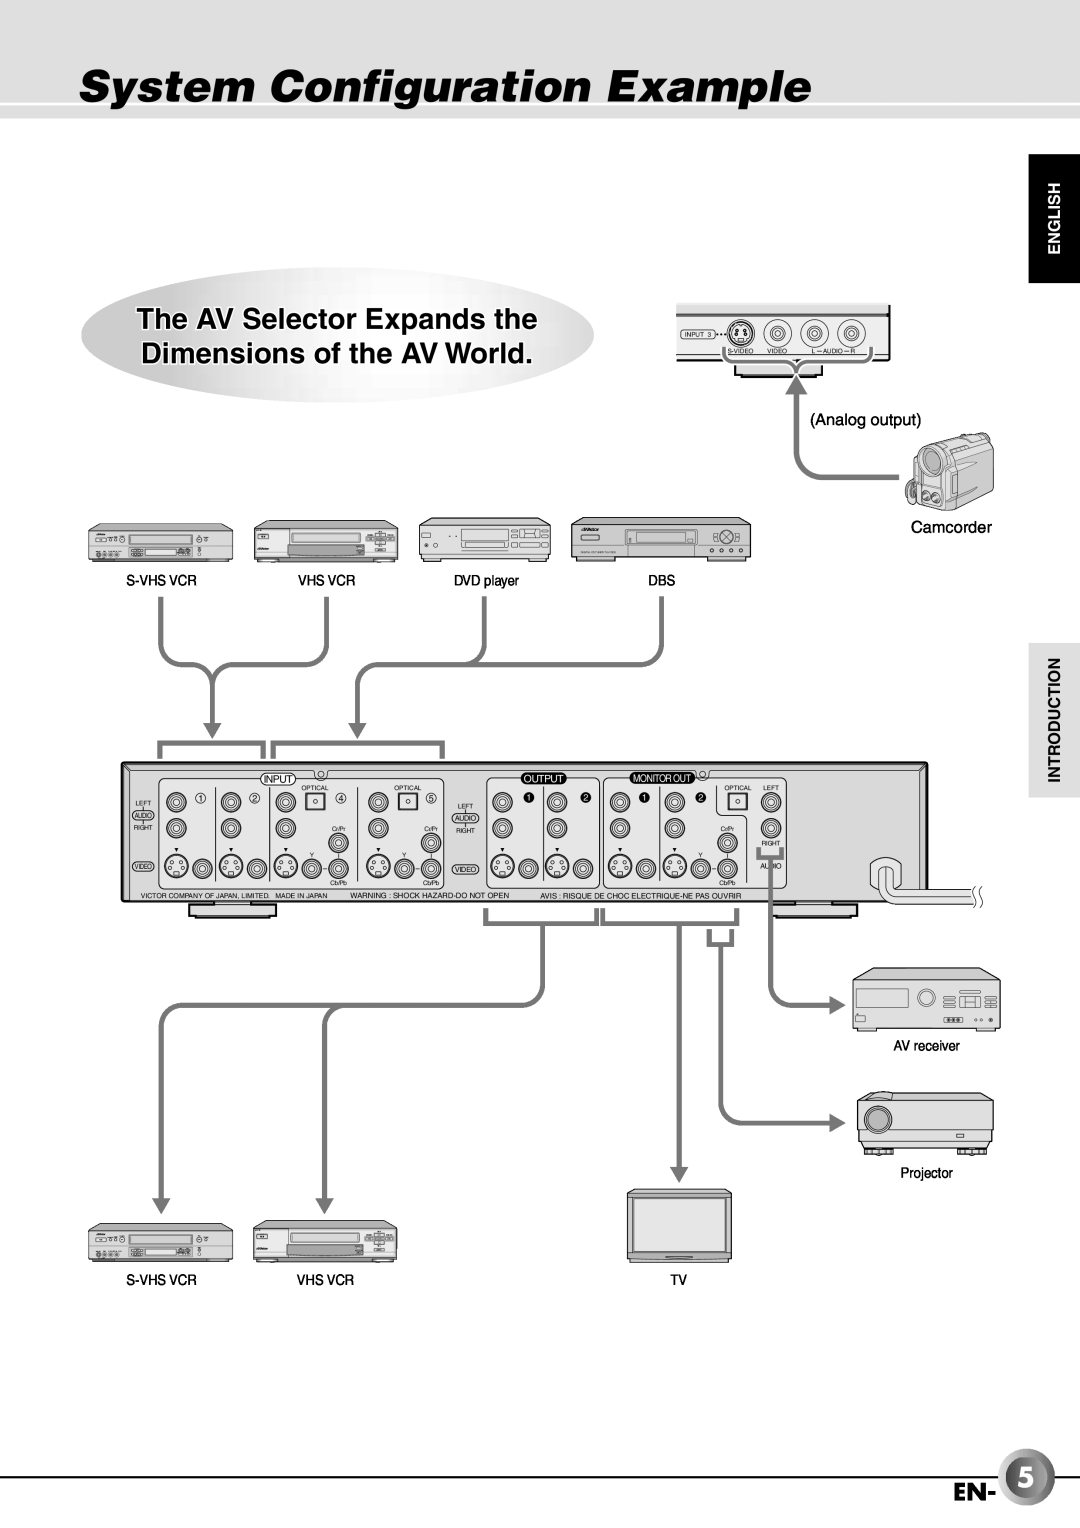 JVC JX-B555 System Configuration Example, English, Introduction, Digital, Recording, Advanced, Operation, Others, S-Vhsvcr 